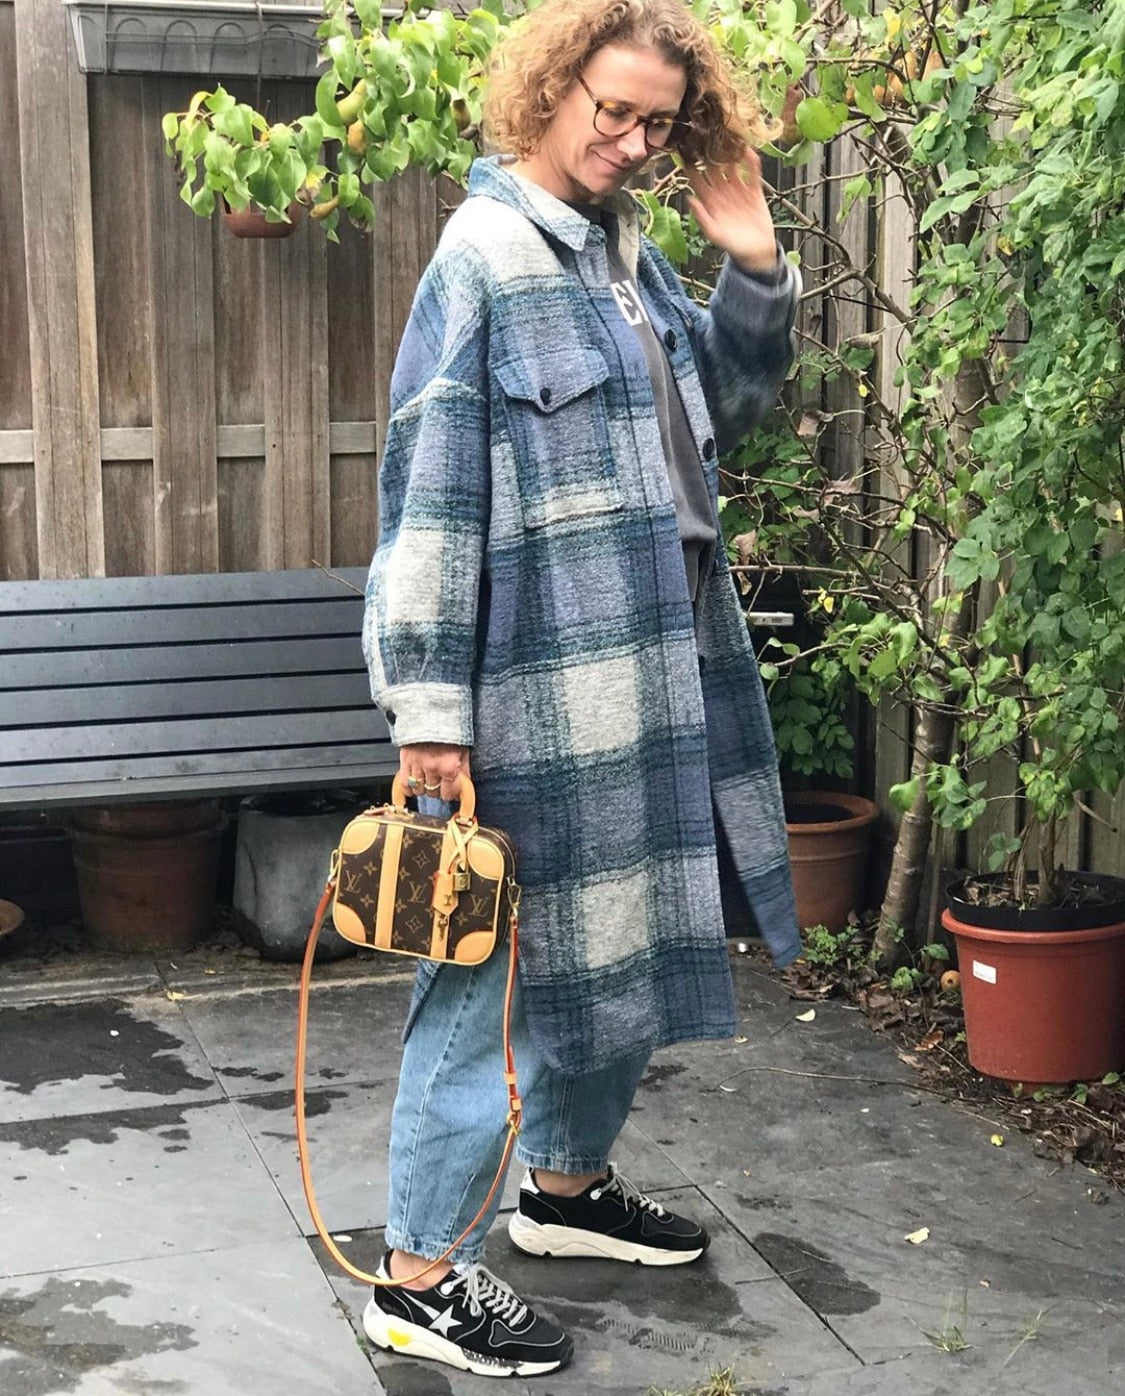 xakxx New Autumn Winter Women Thick Vintage Plaid Long Wool Coat Casual Oversize Shirt Jacket Loose Warm Outwear Overcoats Female